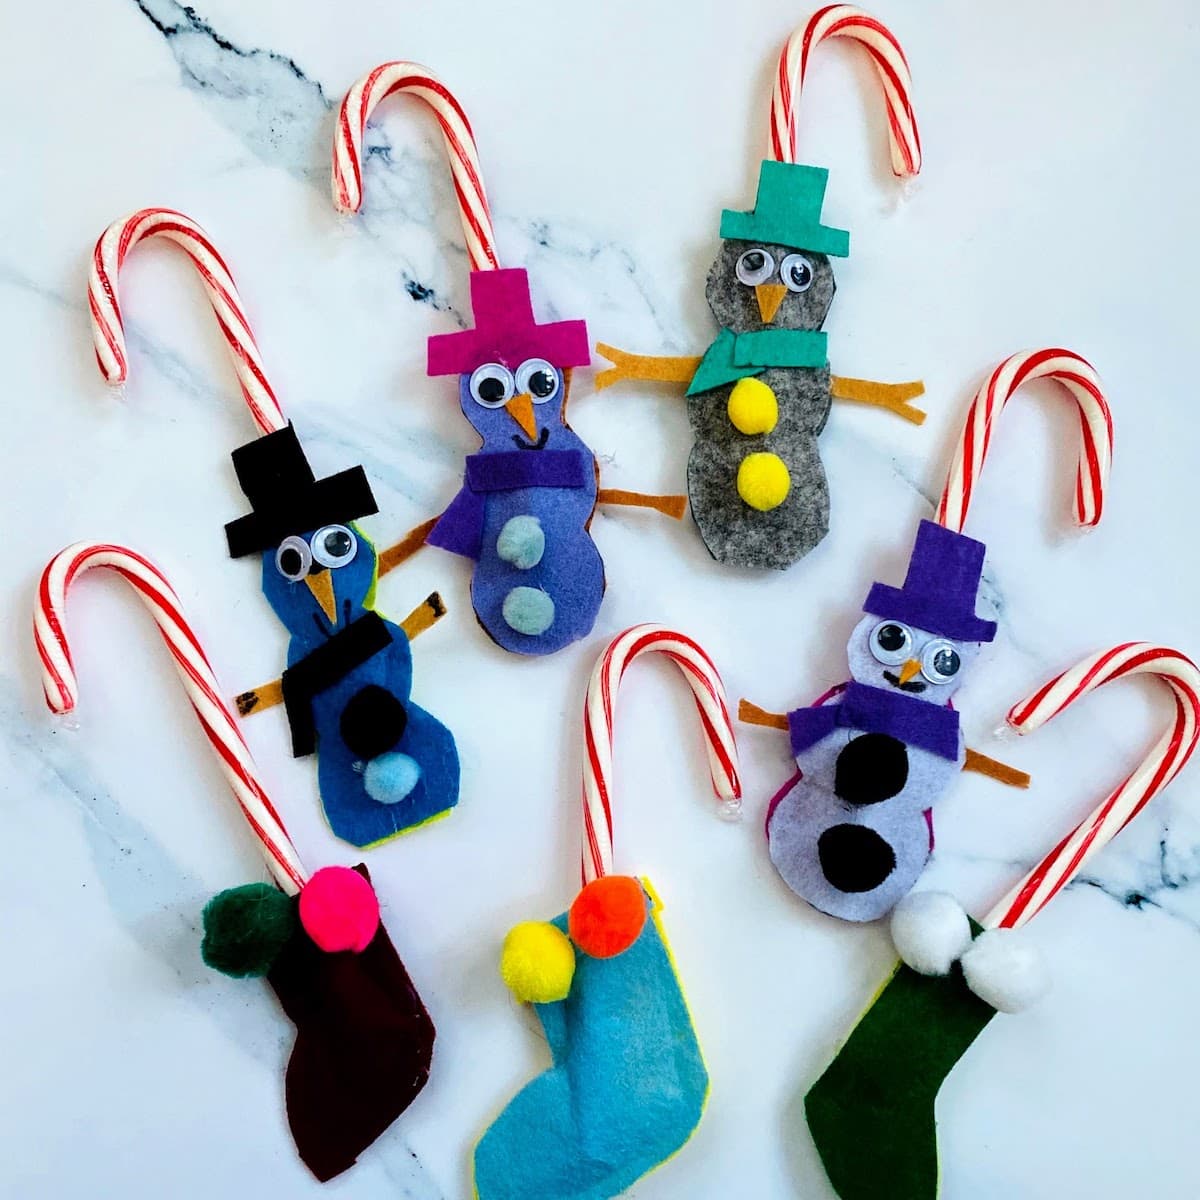 assortment of felt snowmen and stalkings holding candy canes 